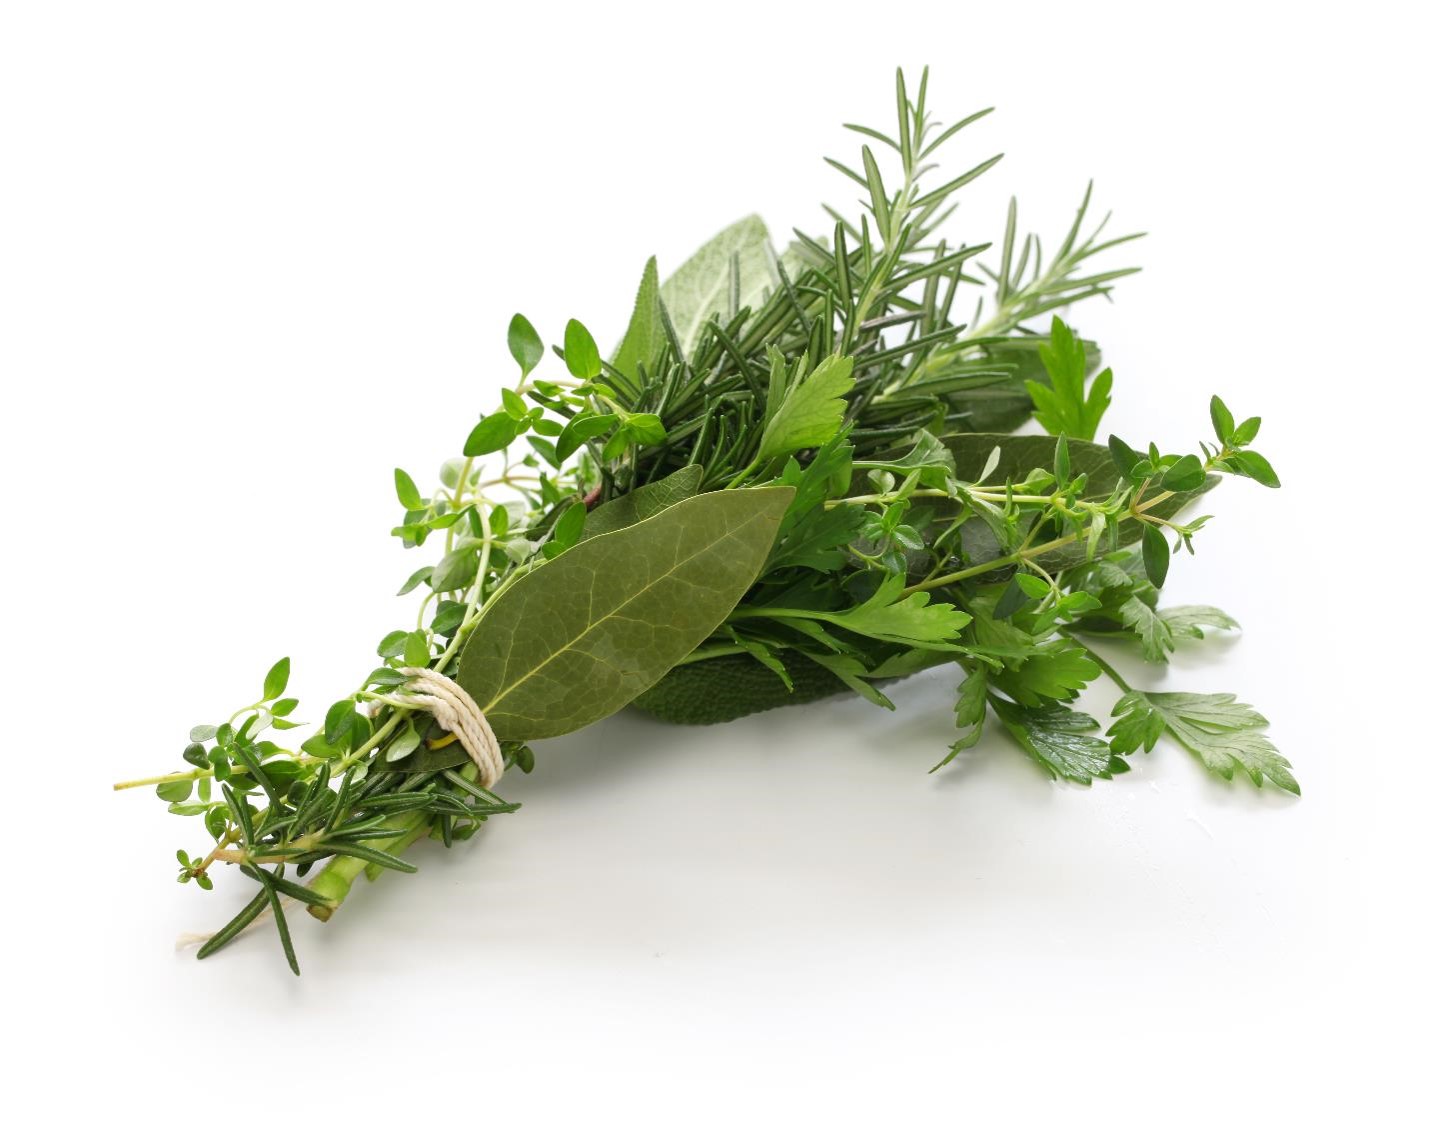 FIND OUT MORE ABOUT MIXED HERBS